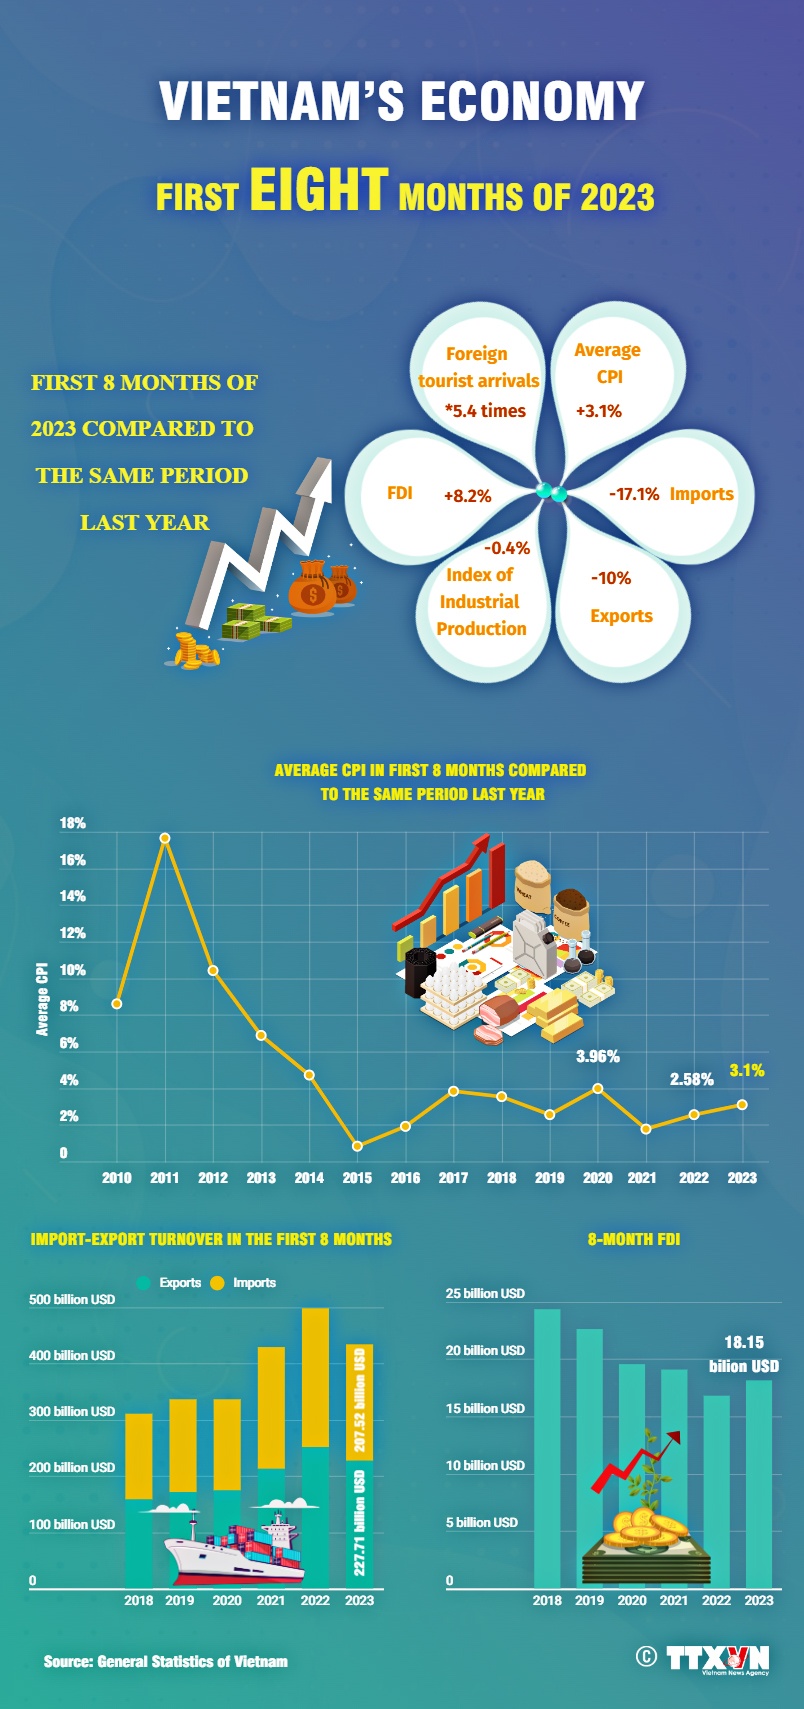 Vietnam’s economic performance in the first 8 months of 2023